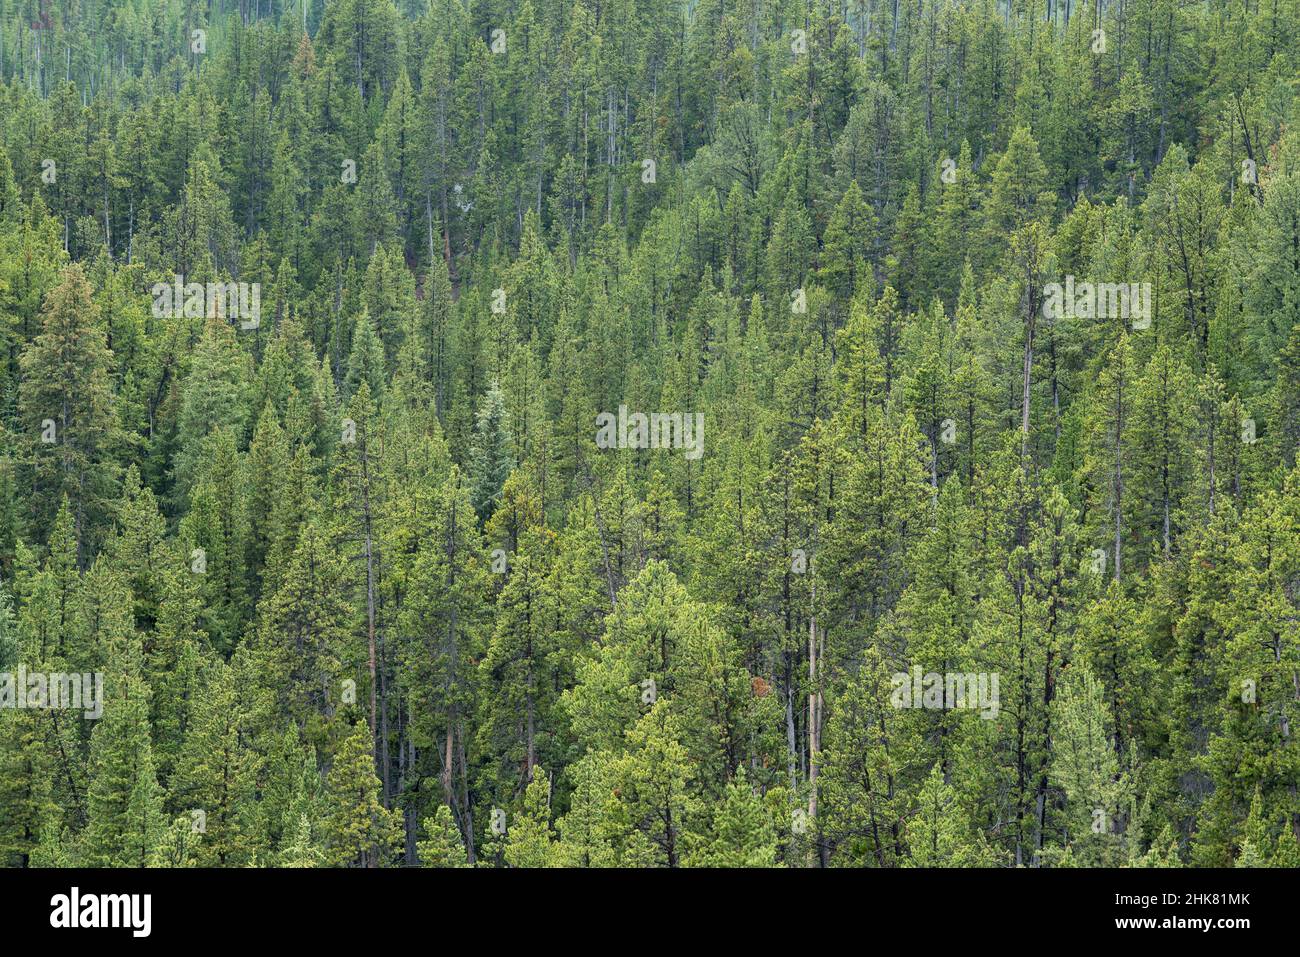 Lodgepole Pine forest,; Virginia Cascades Drive, Yellowstone National Park, Wyoming. Stock Photo